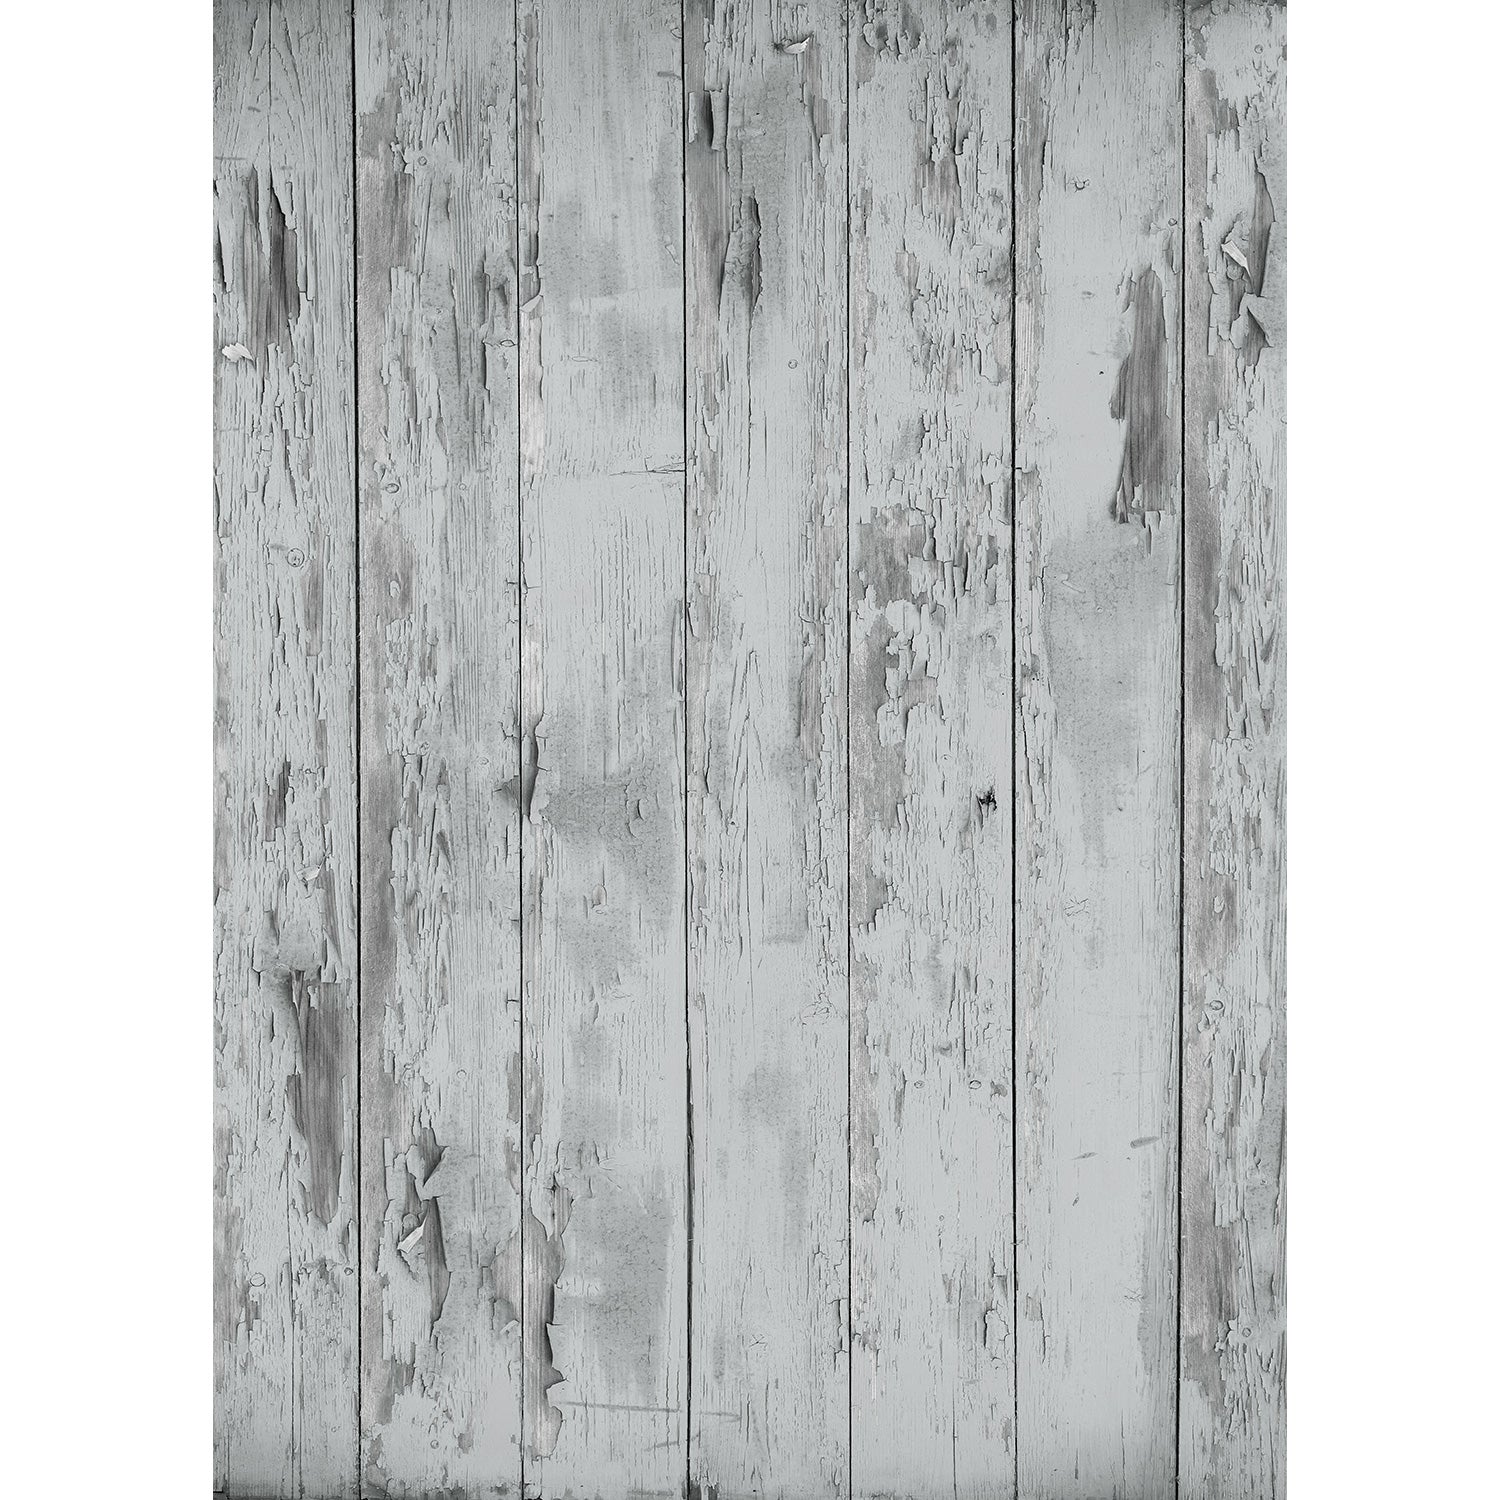 D0003-63X87-VY-GY - X-Drop Backdrop – Rich Gray Distressed Wood Panels Lightweight Canvas (5' x 7') - X-Drop Backdrop – Rich Gray Distressed Wood Panels Lightweight Canvas (5' x 7') - D0003-63X87-CV-GY - X-Drop Backdrop – Rich Gray Distressed Wood Panels 